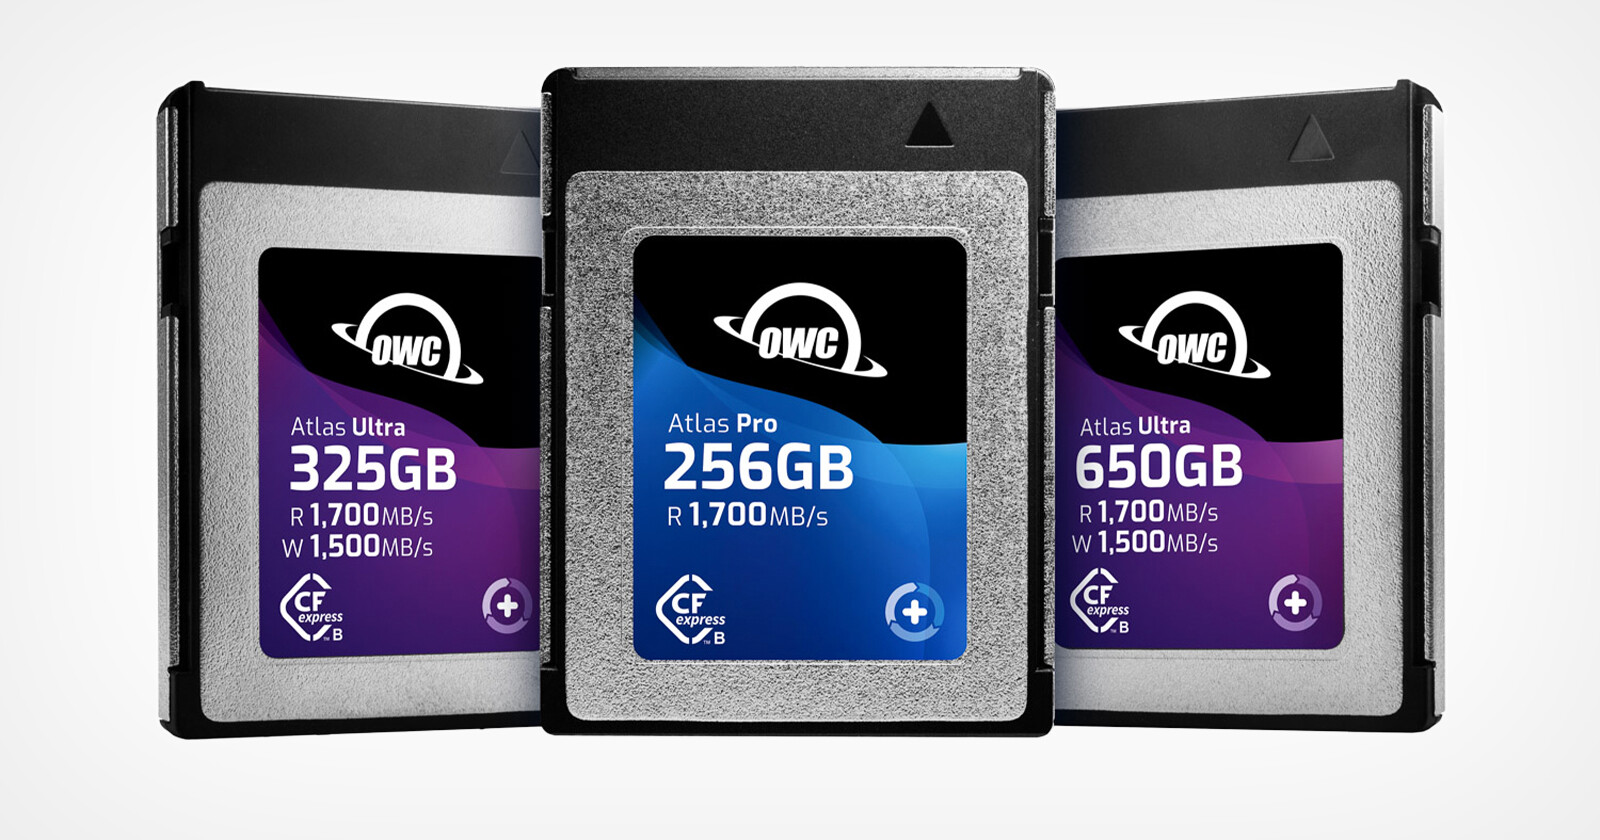  owc unveils memory card software readers portable 